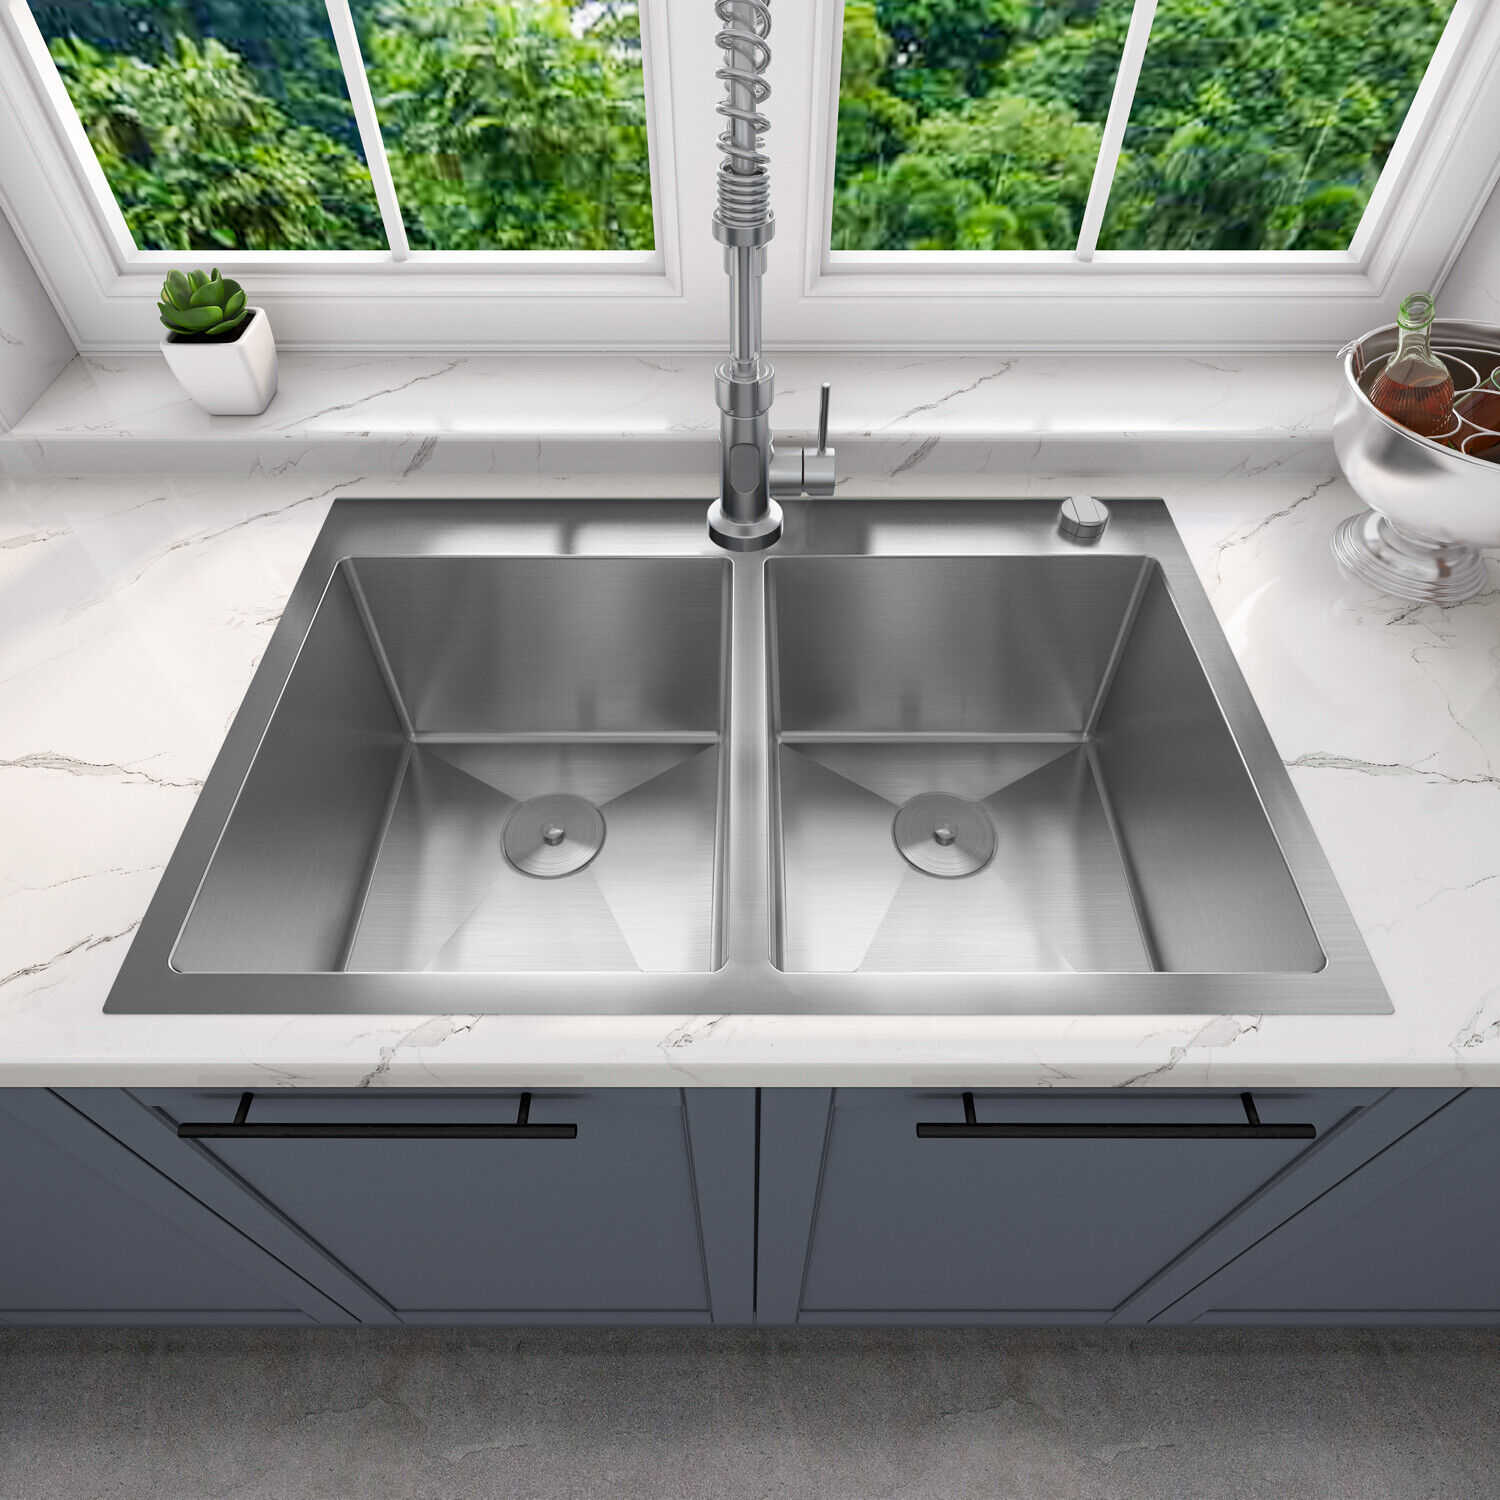 Sinber 33" Drop In Double Bowl 304 Stainless Steel Kitchen Sink